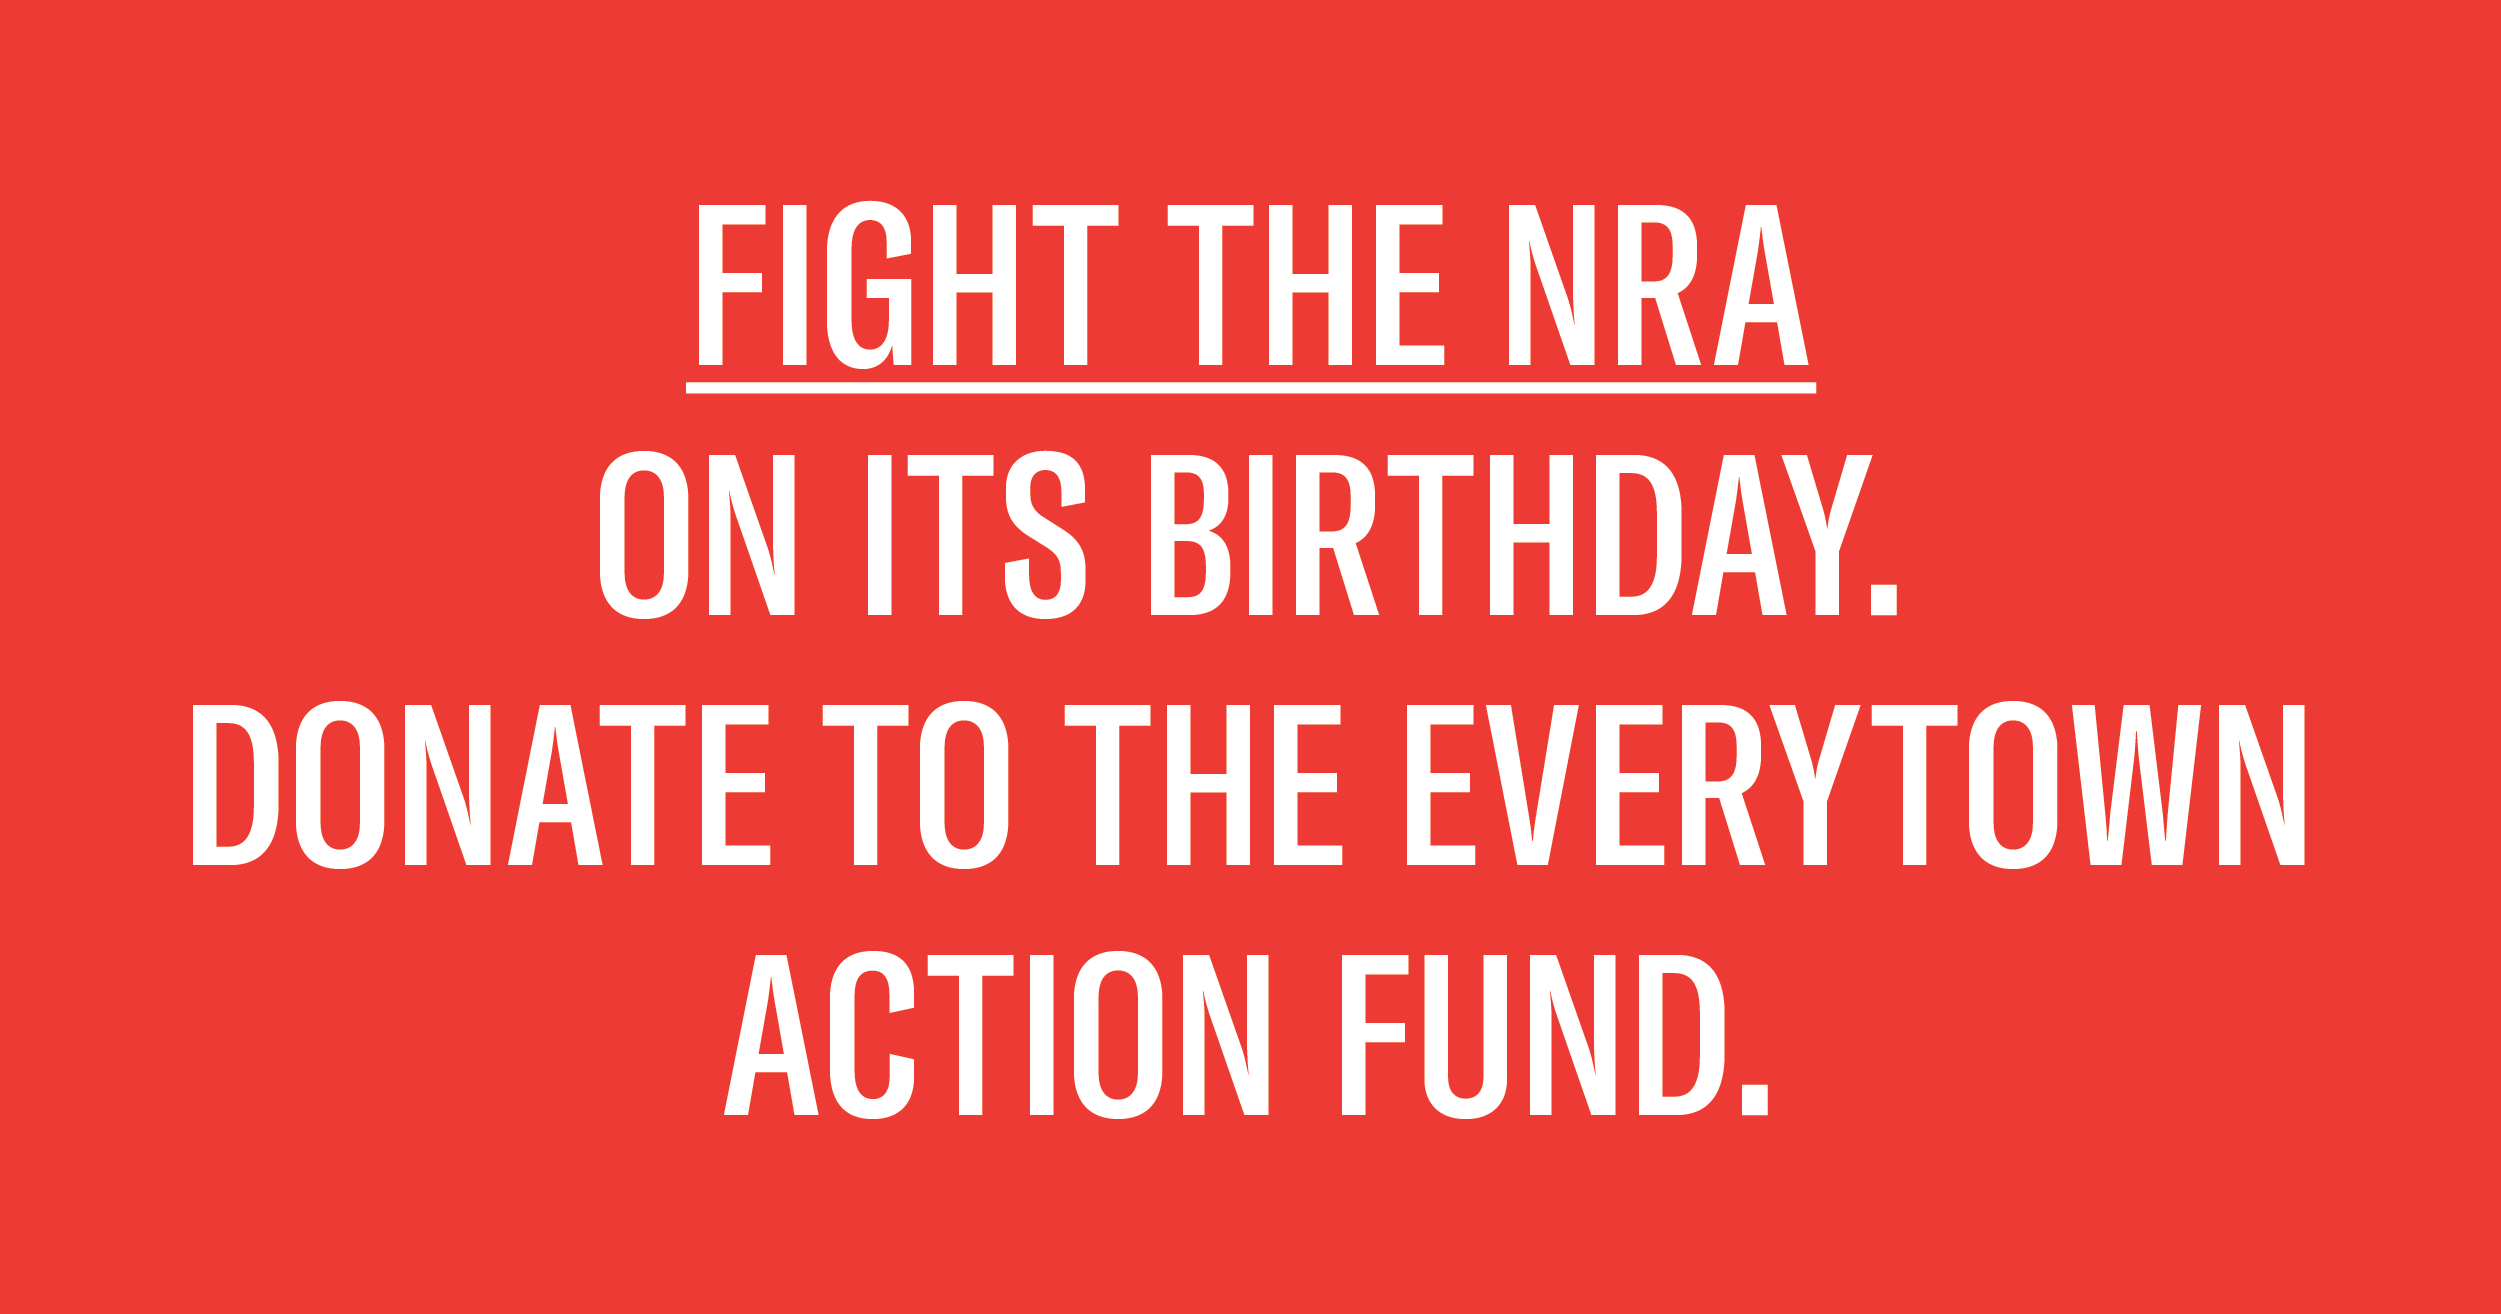 Fight the NRA on its birthday. Donate to the Everytown Action Fund.